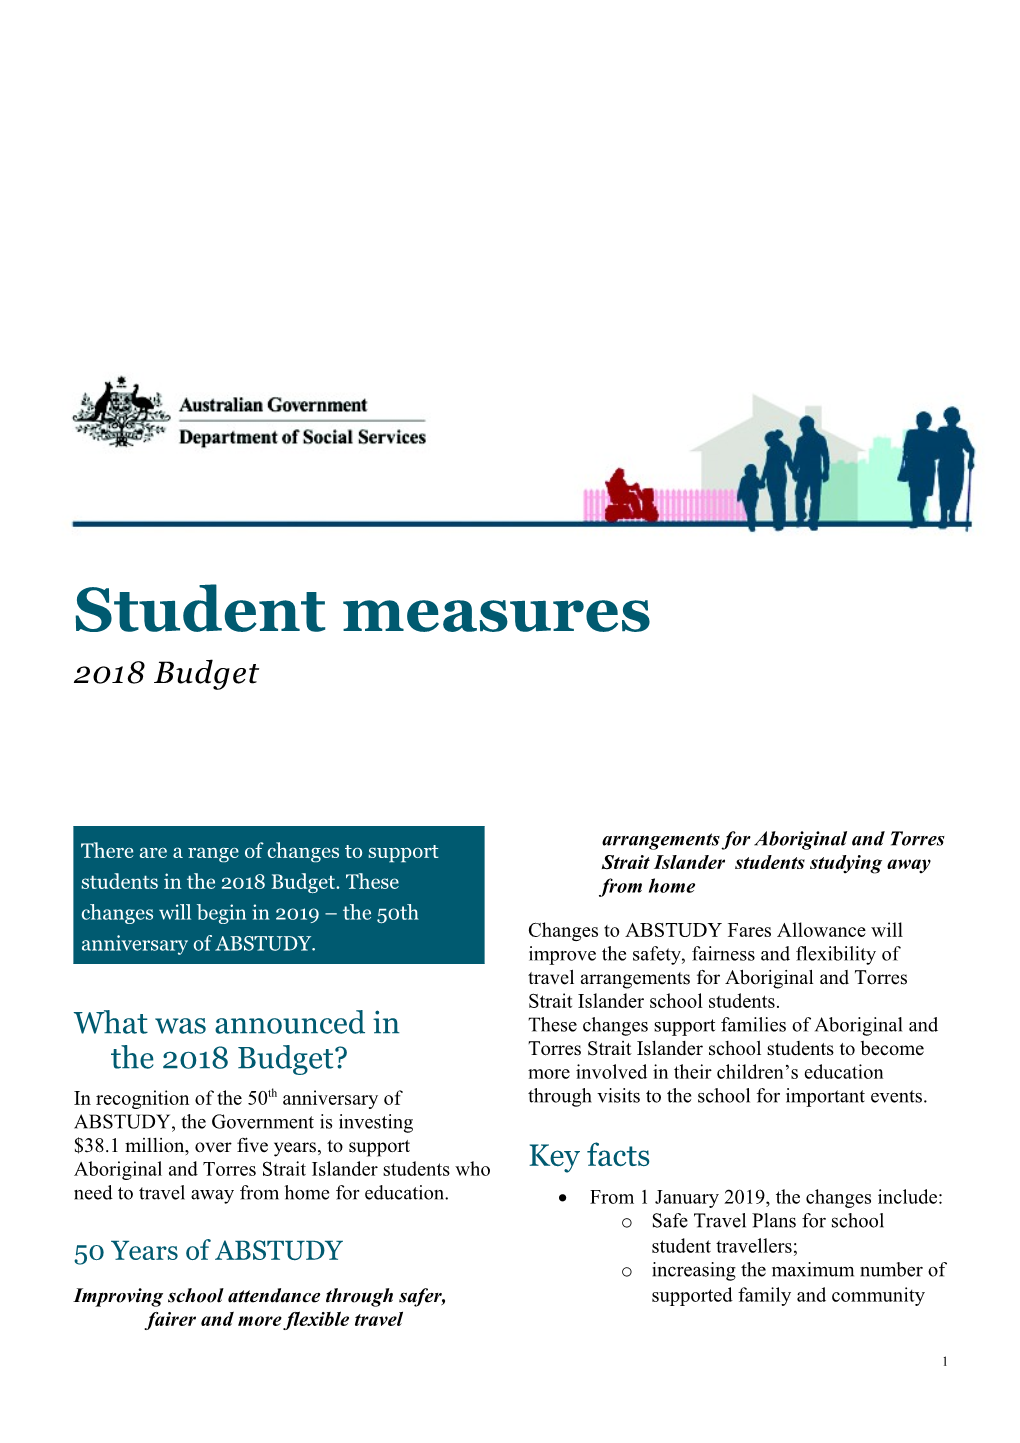 What Was Announced in the 2018Budget?